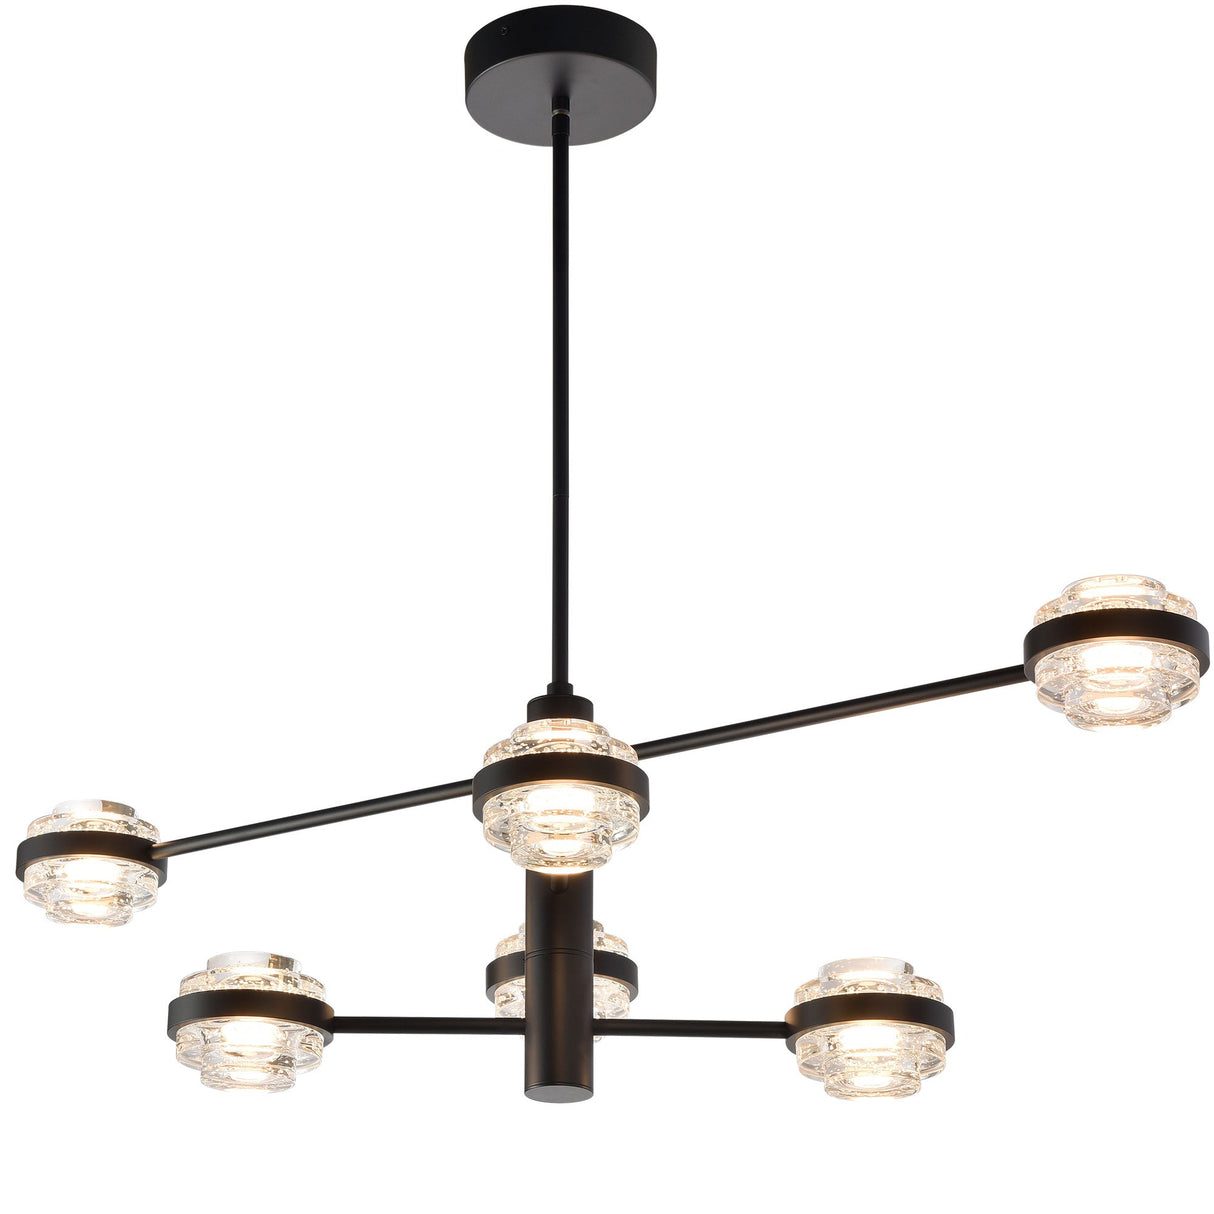 VONN Artisan Milano VAC333RD6BL 40" Integrated LED ETL Certified Chandelier with Height Adjustable Rods, Black